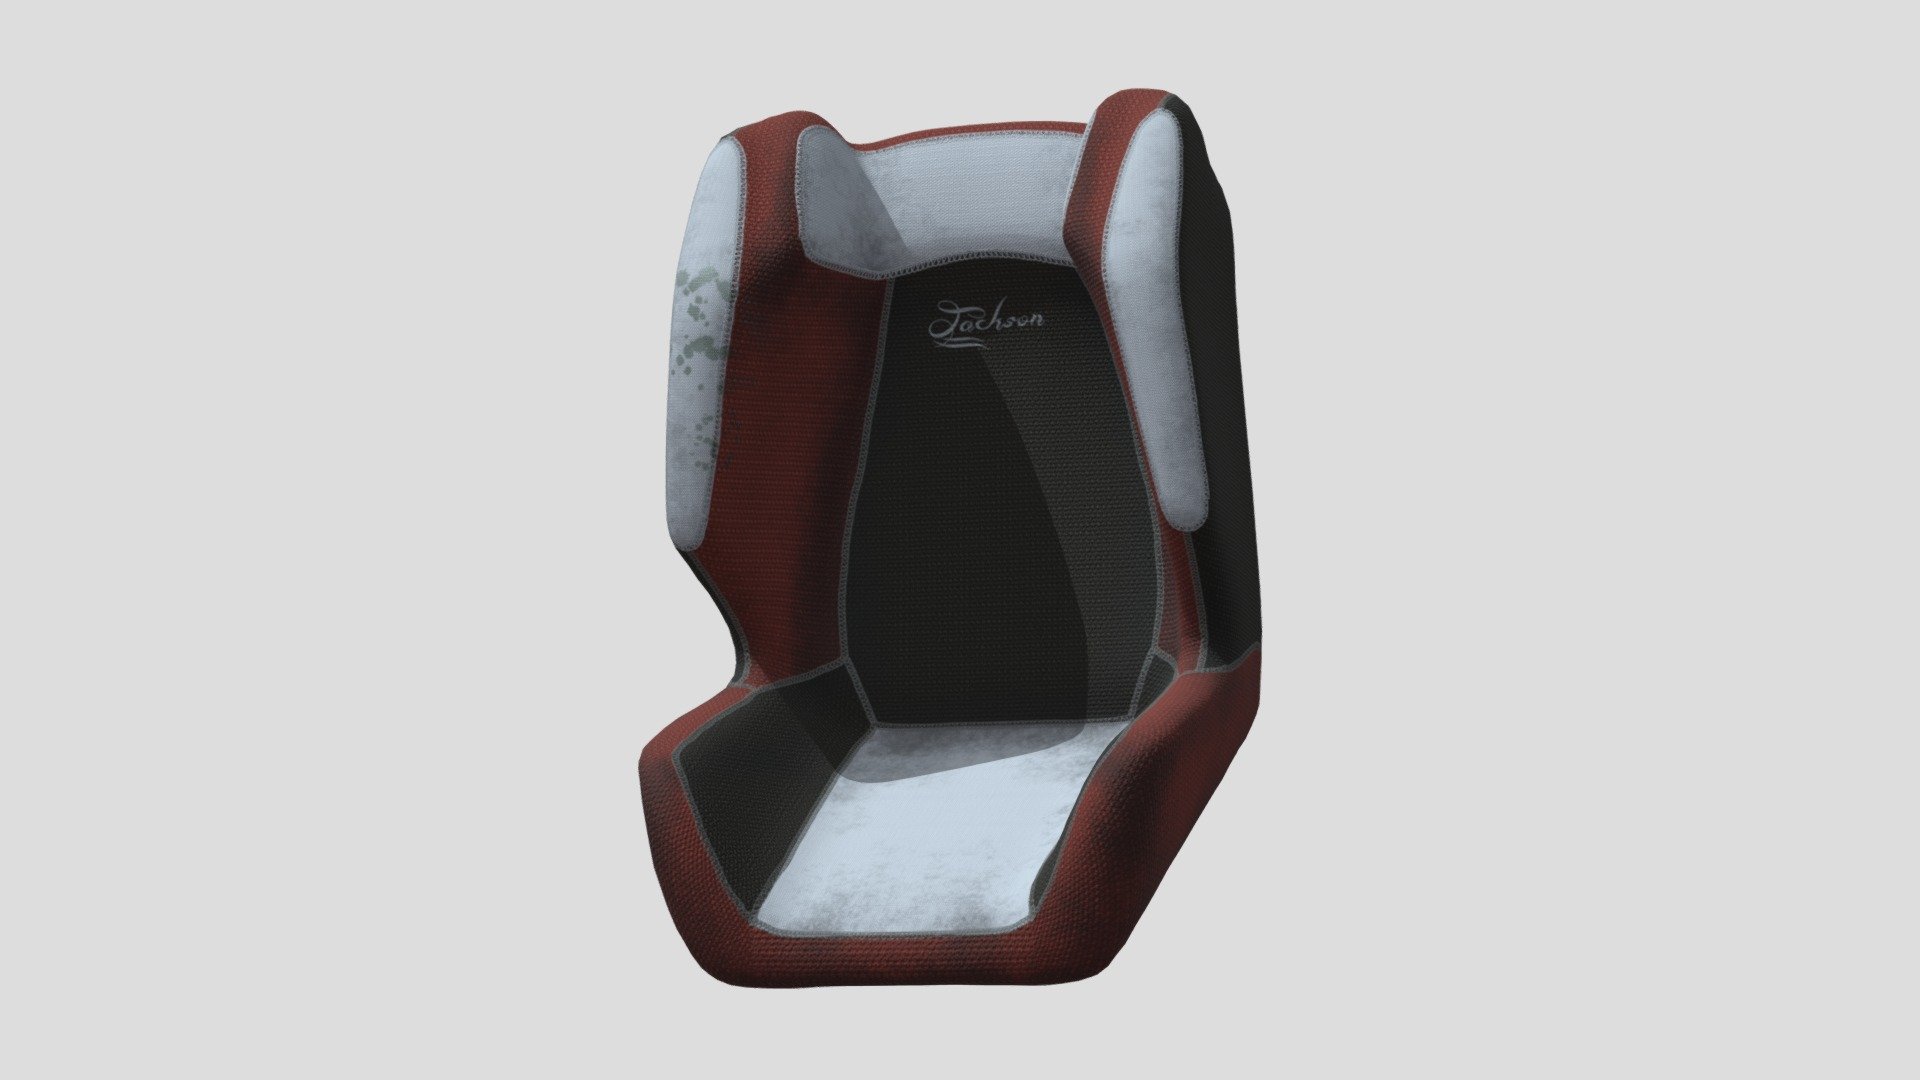 Basic baby car seat, dirty used. Part of a personal project I'm working on - seat belt will be added to the character 3d model